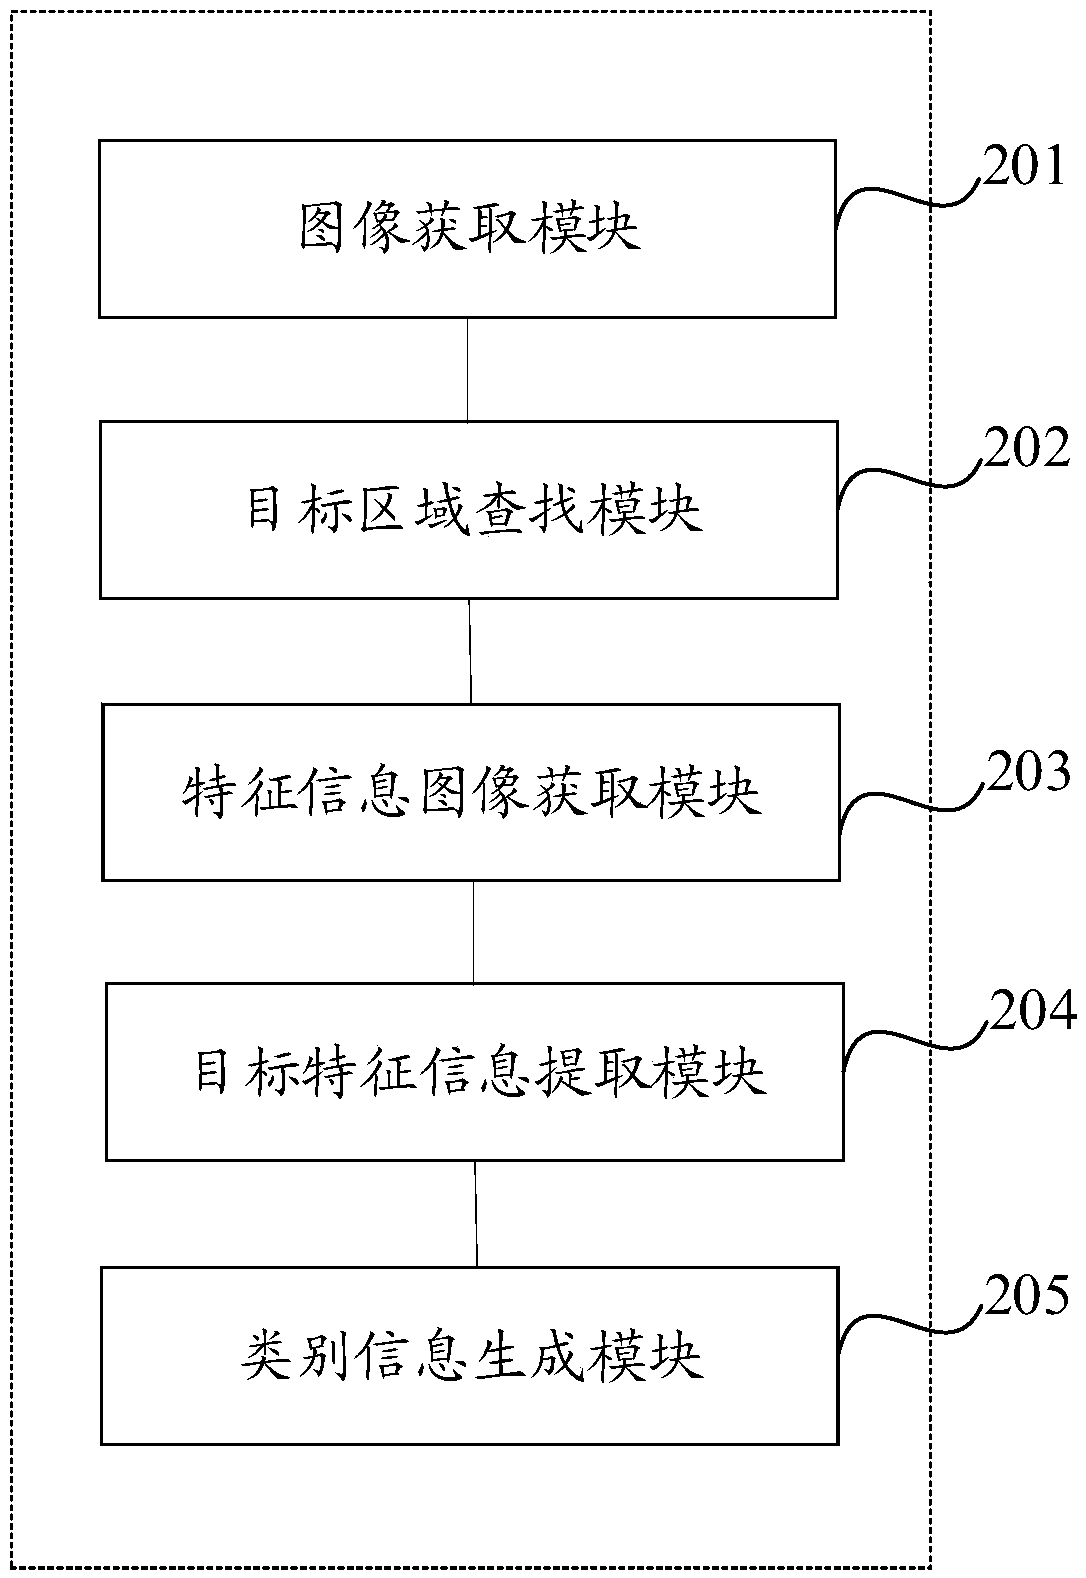 A feature image category information generation method and device